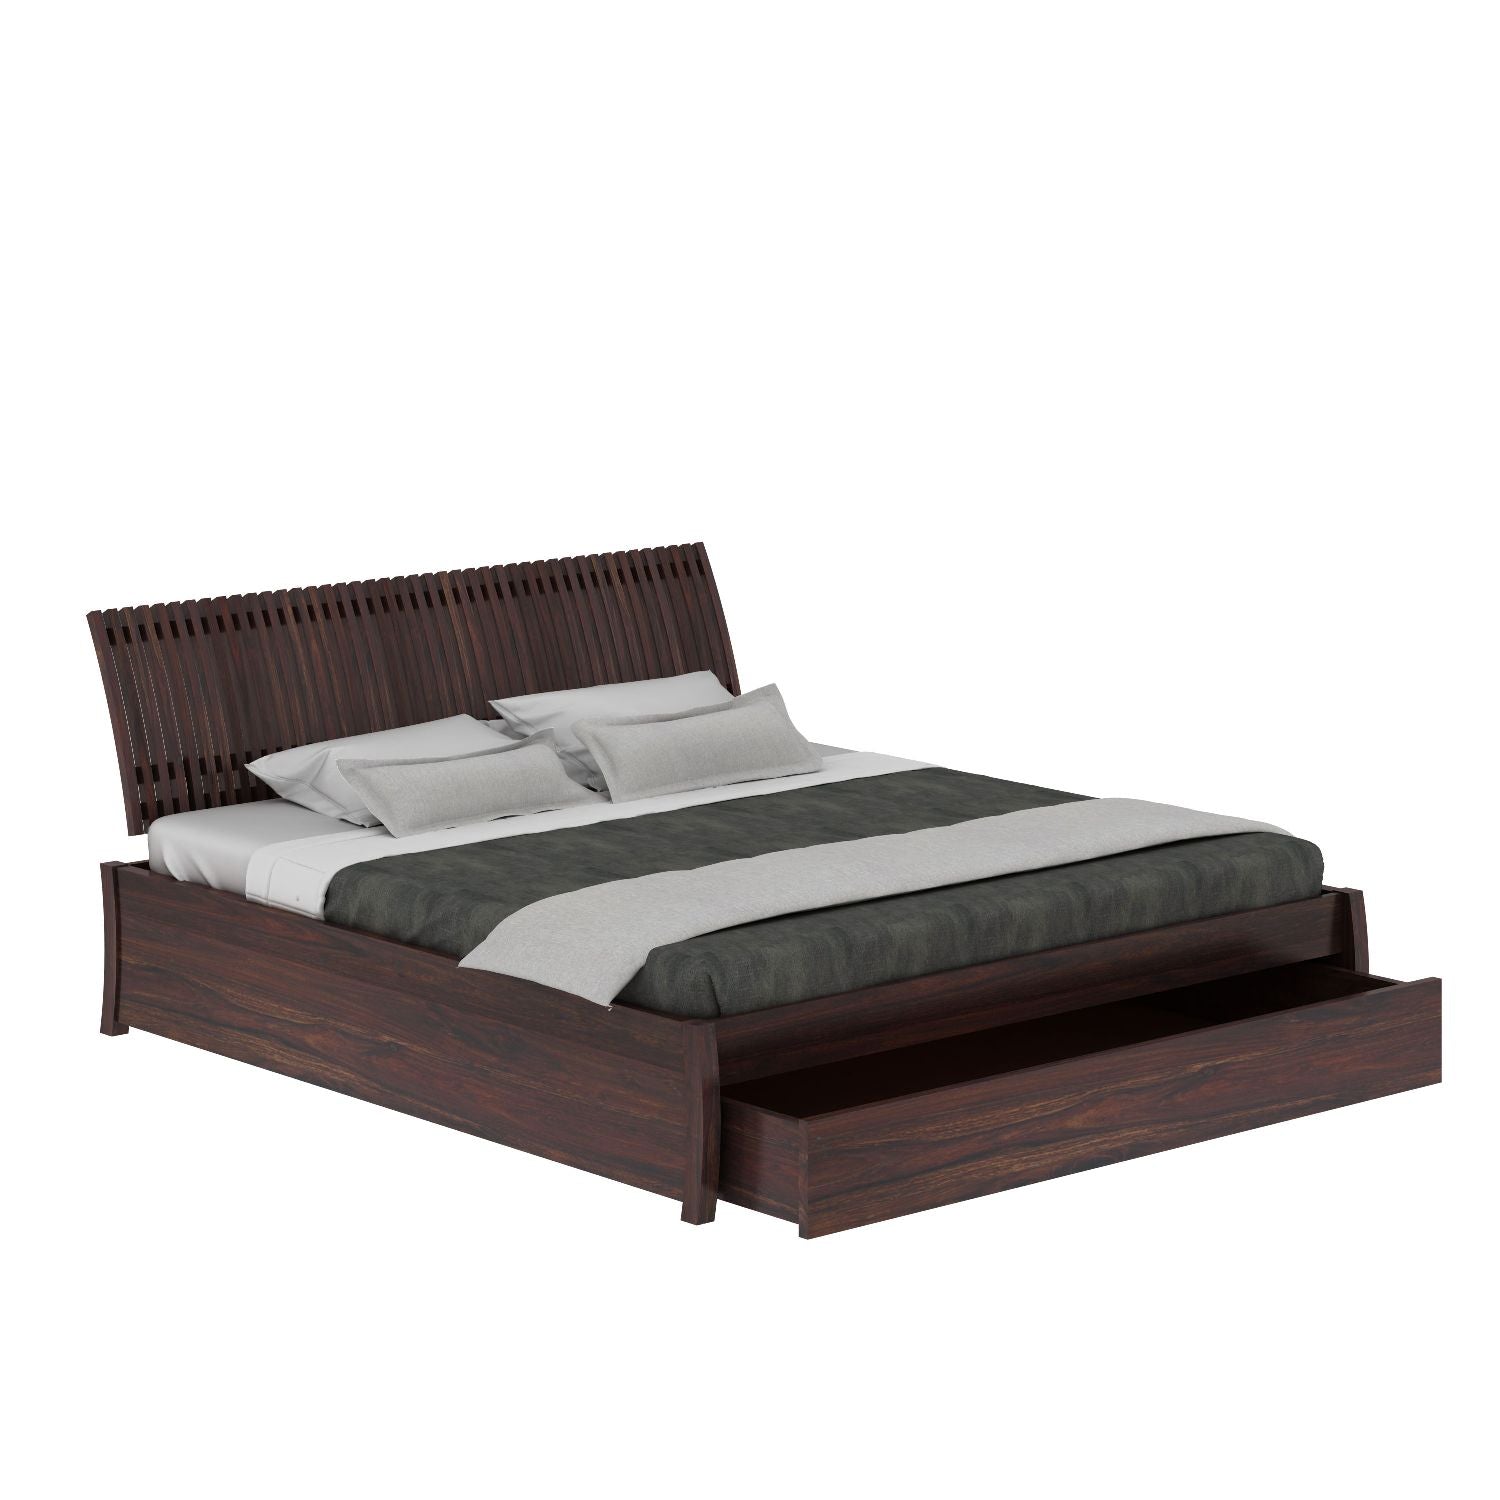 Dumdum Solid Sheesham Wood Bed With One Drawer (Queen Size, Walnut Finish)